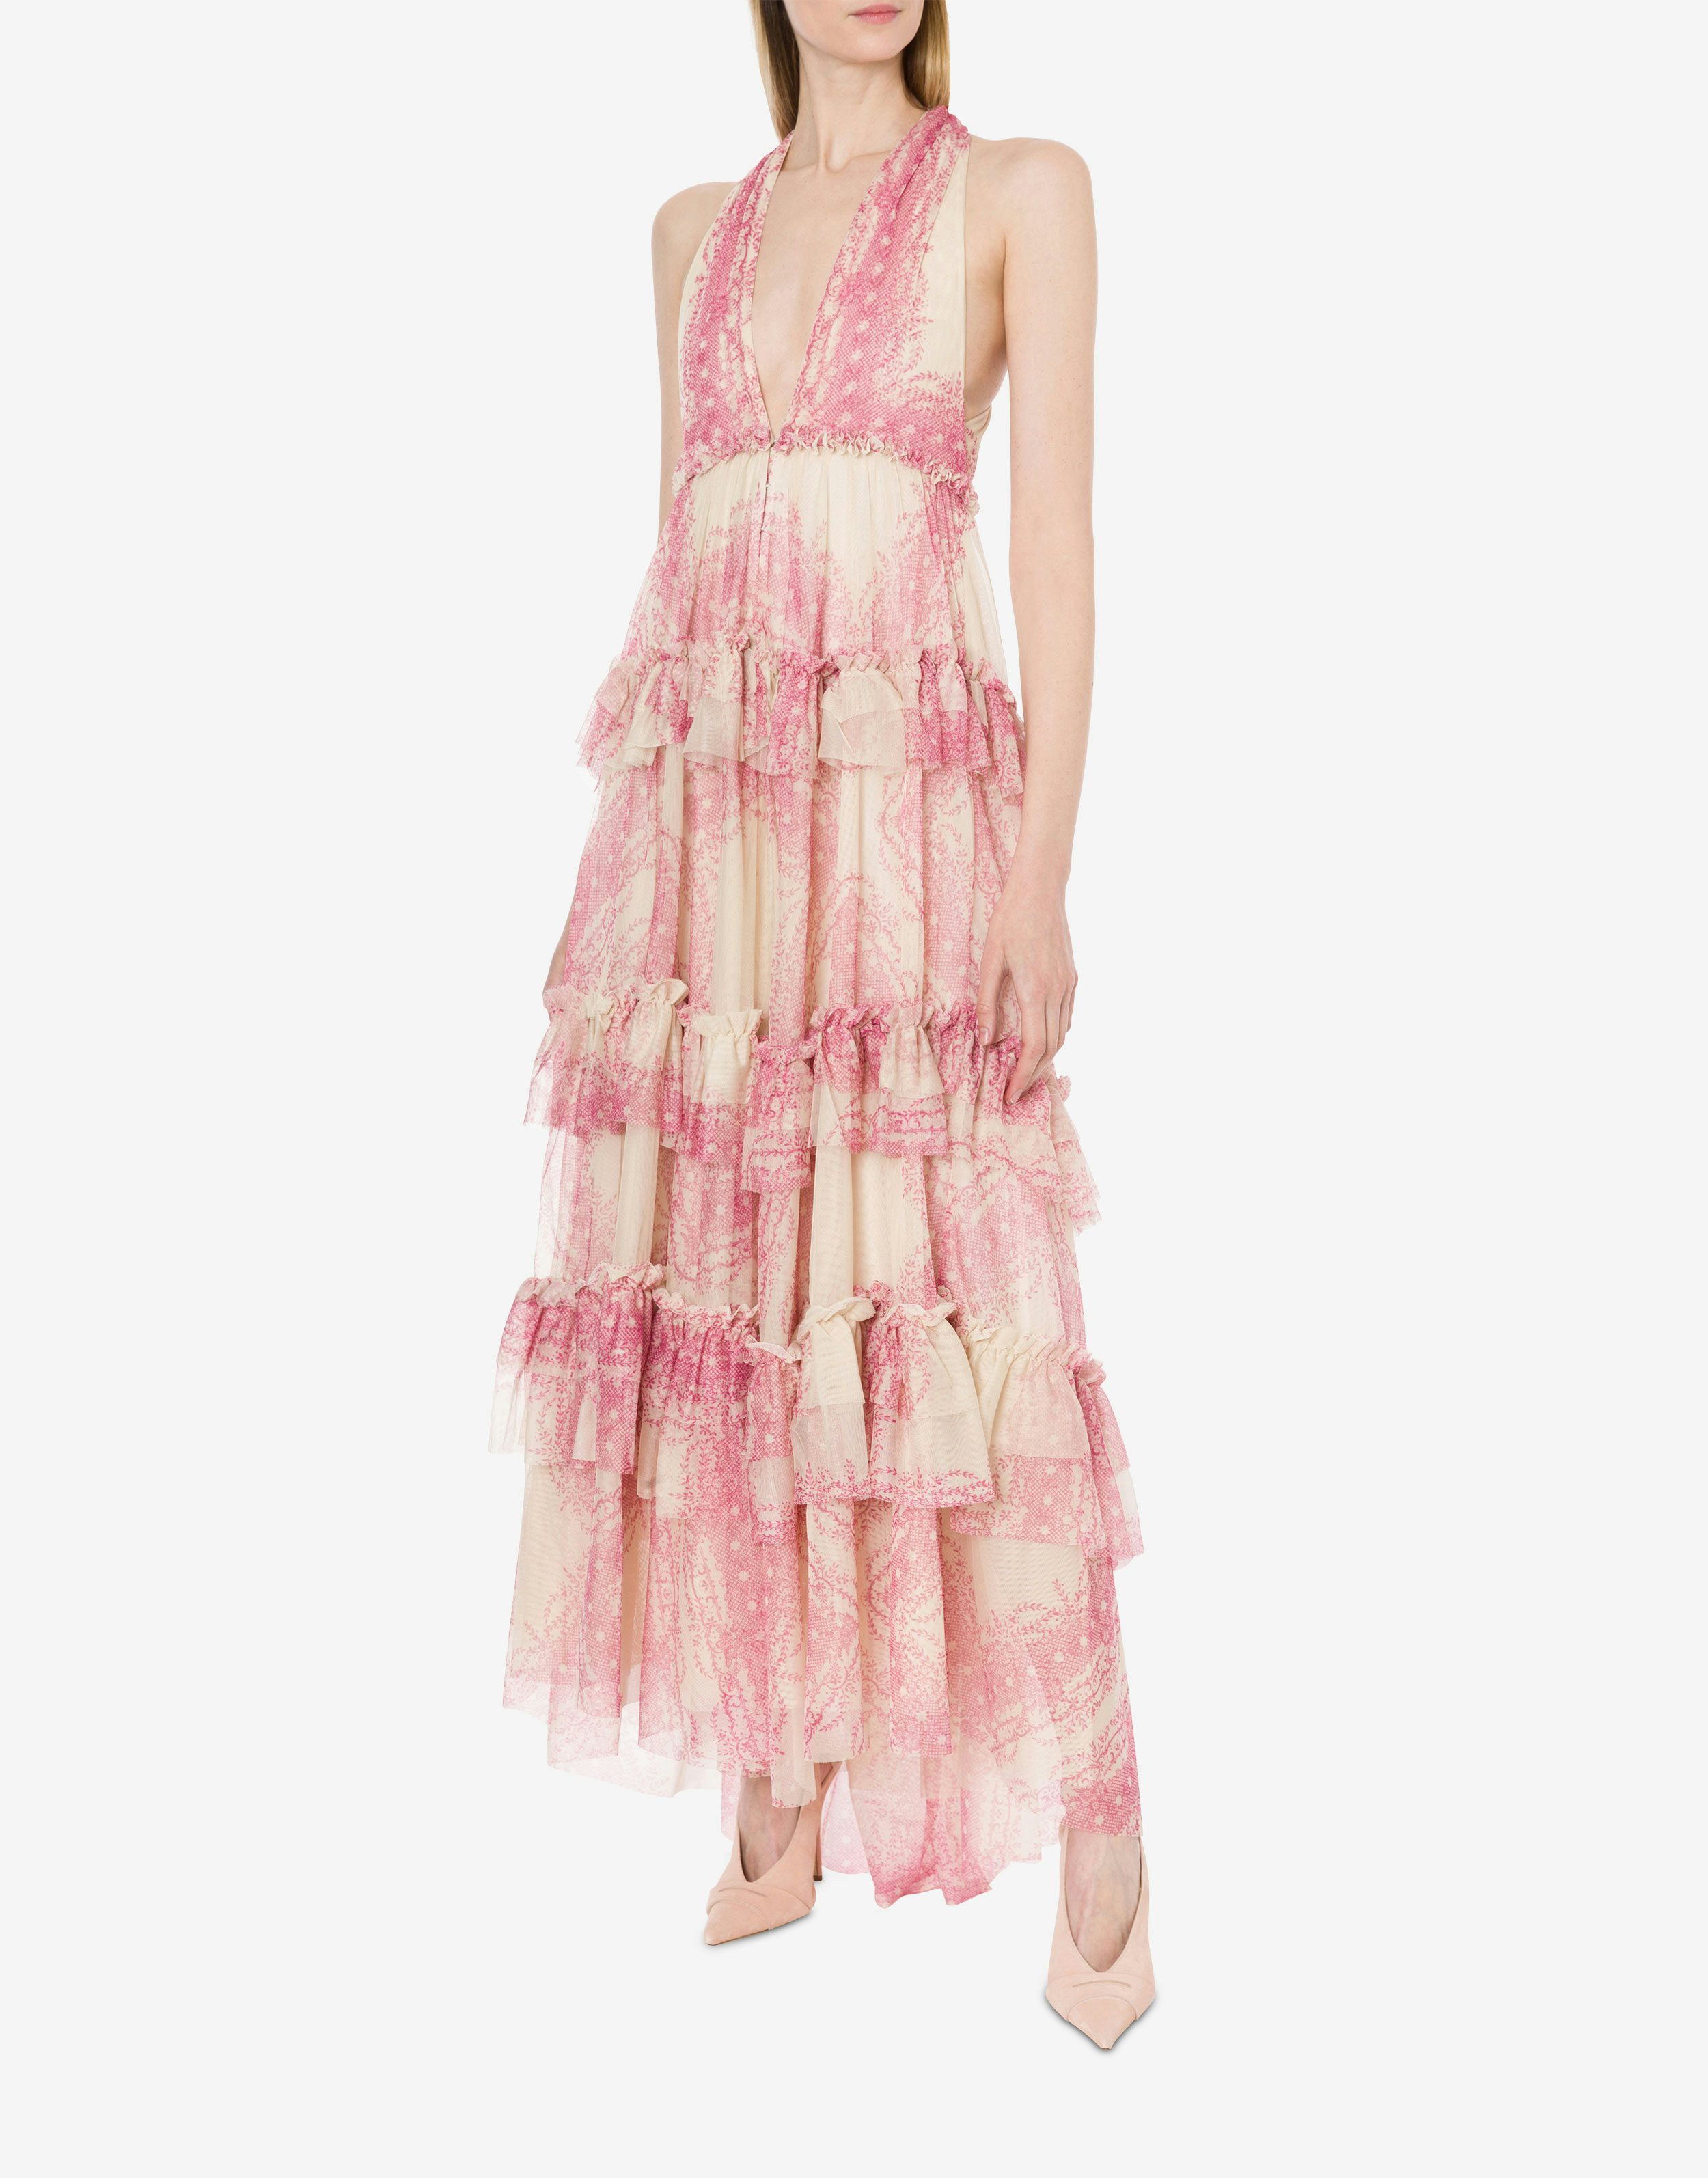 Ruffled dress in printed tulle